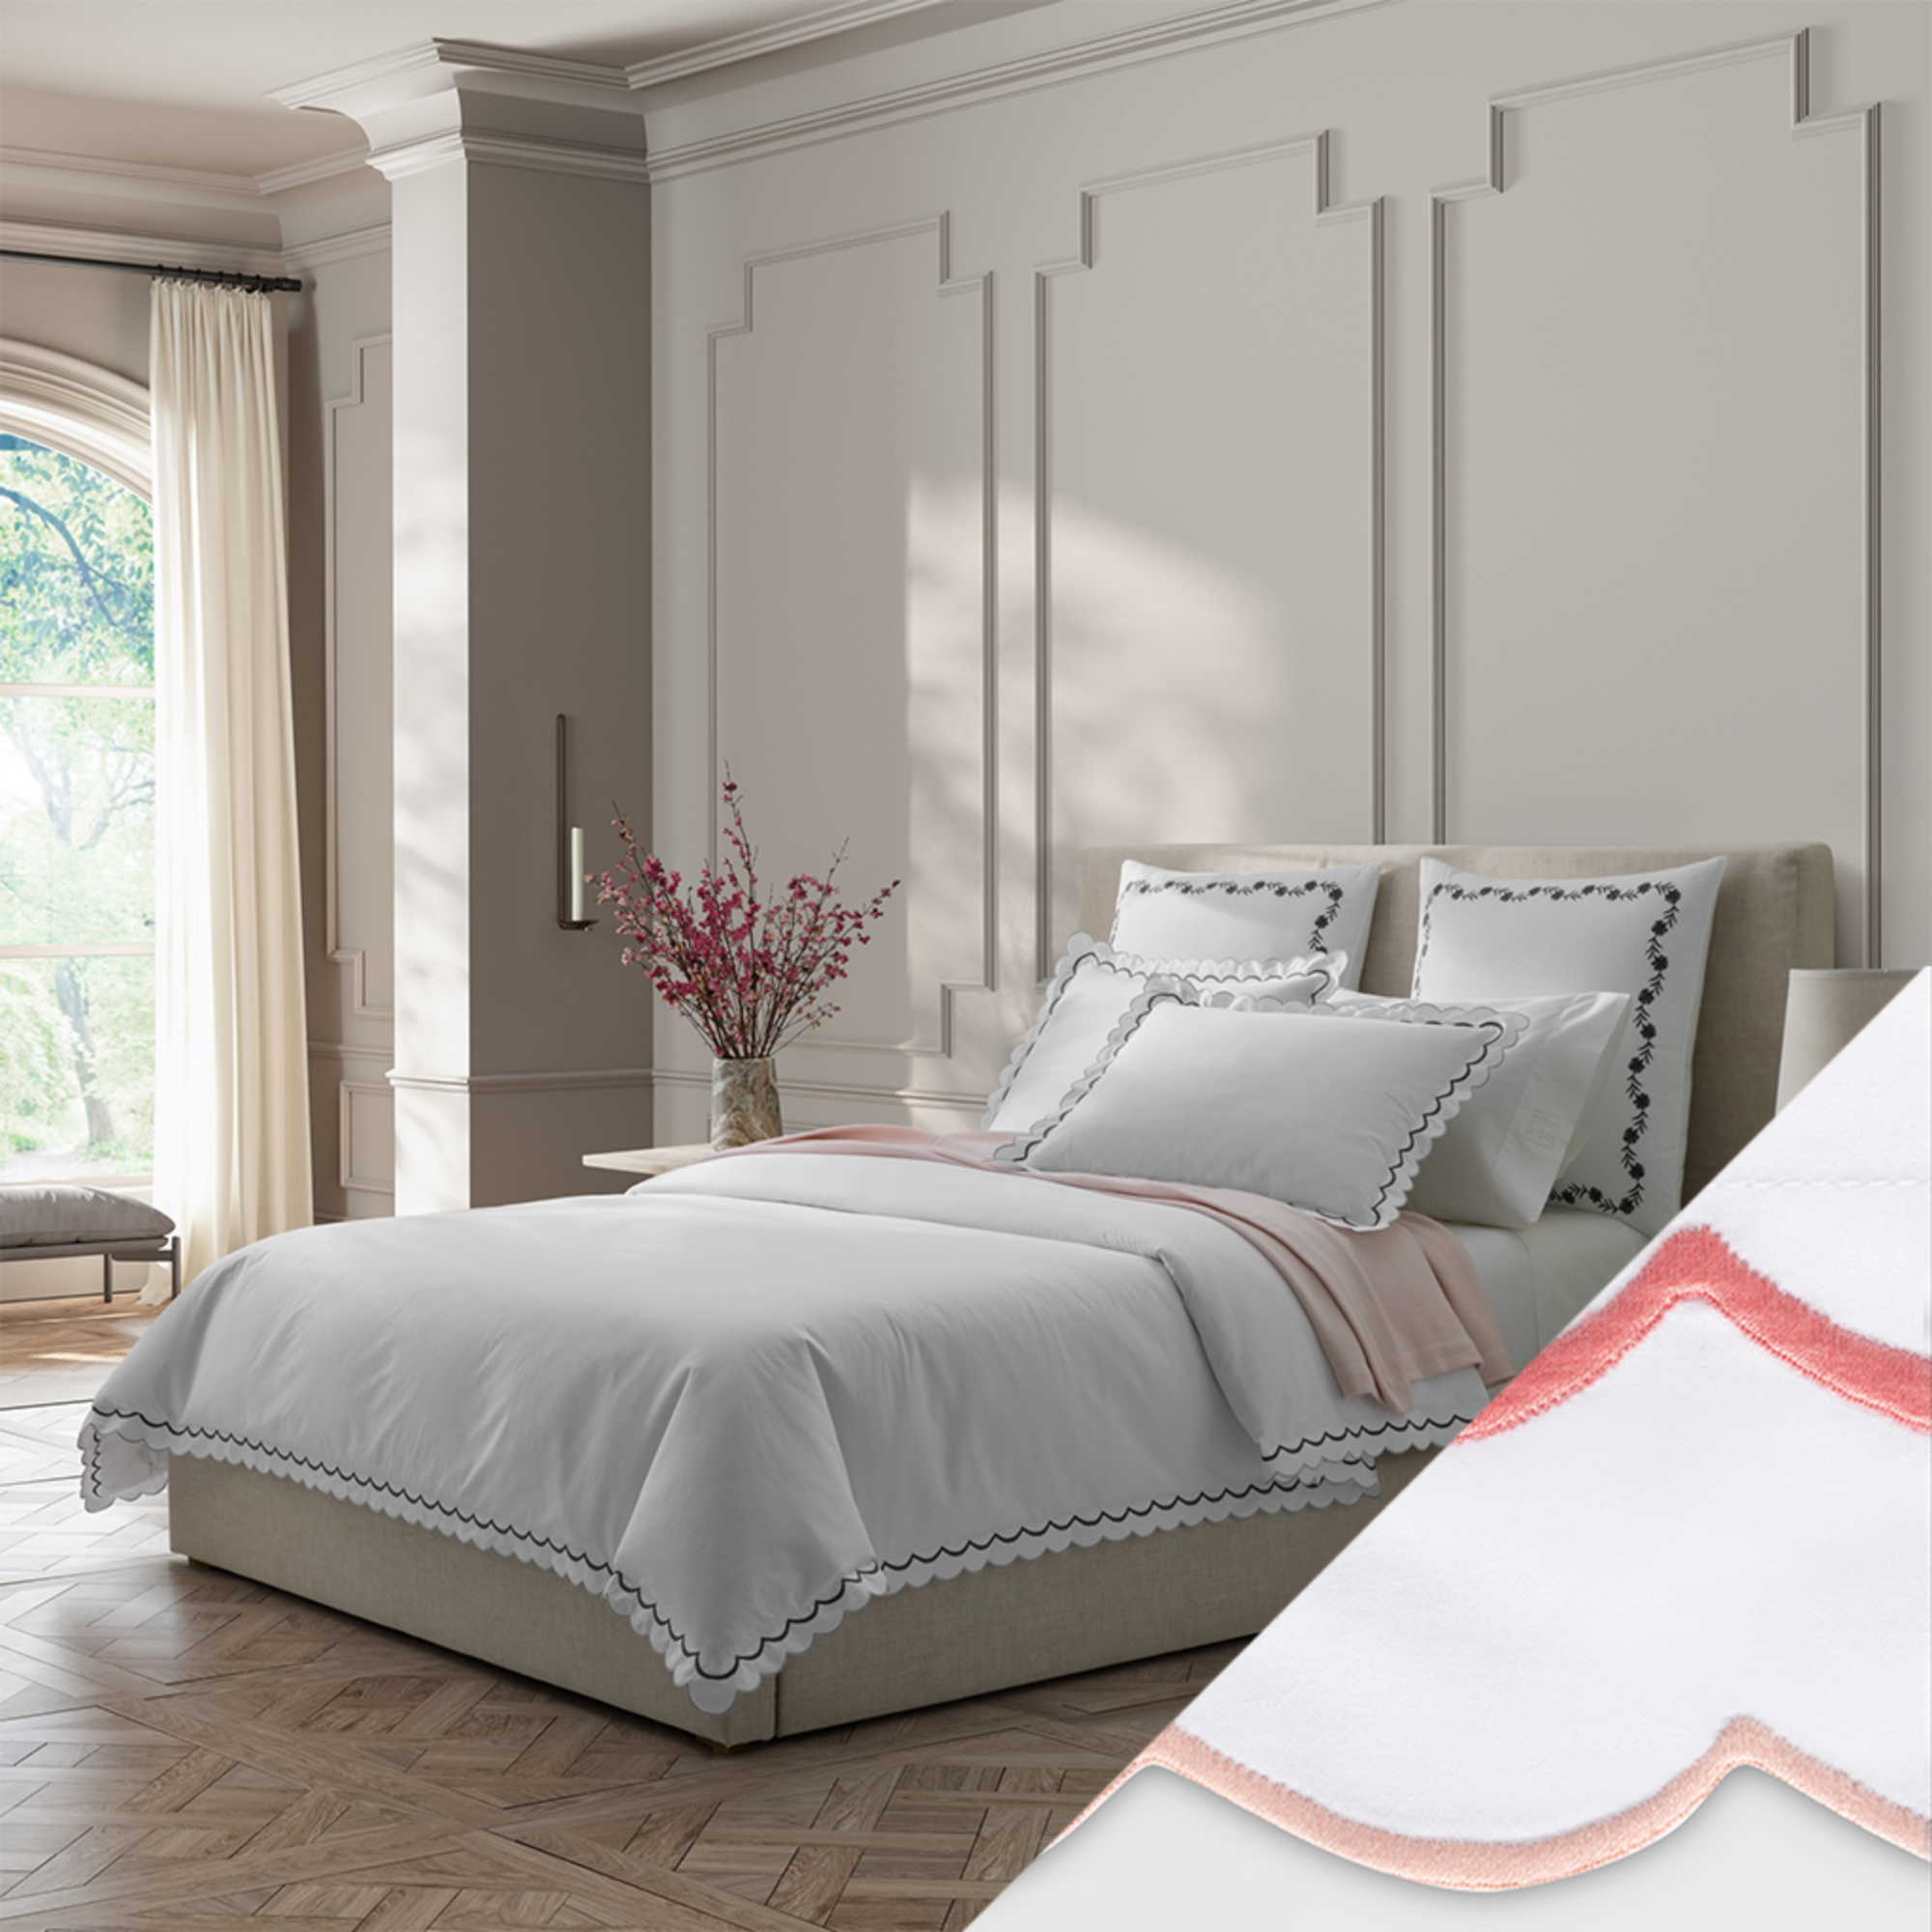 Full Bed Dressed in Matouk India Bedding in Charcoal Color with Blush Swatch